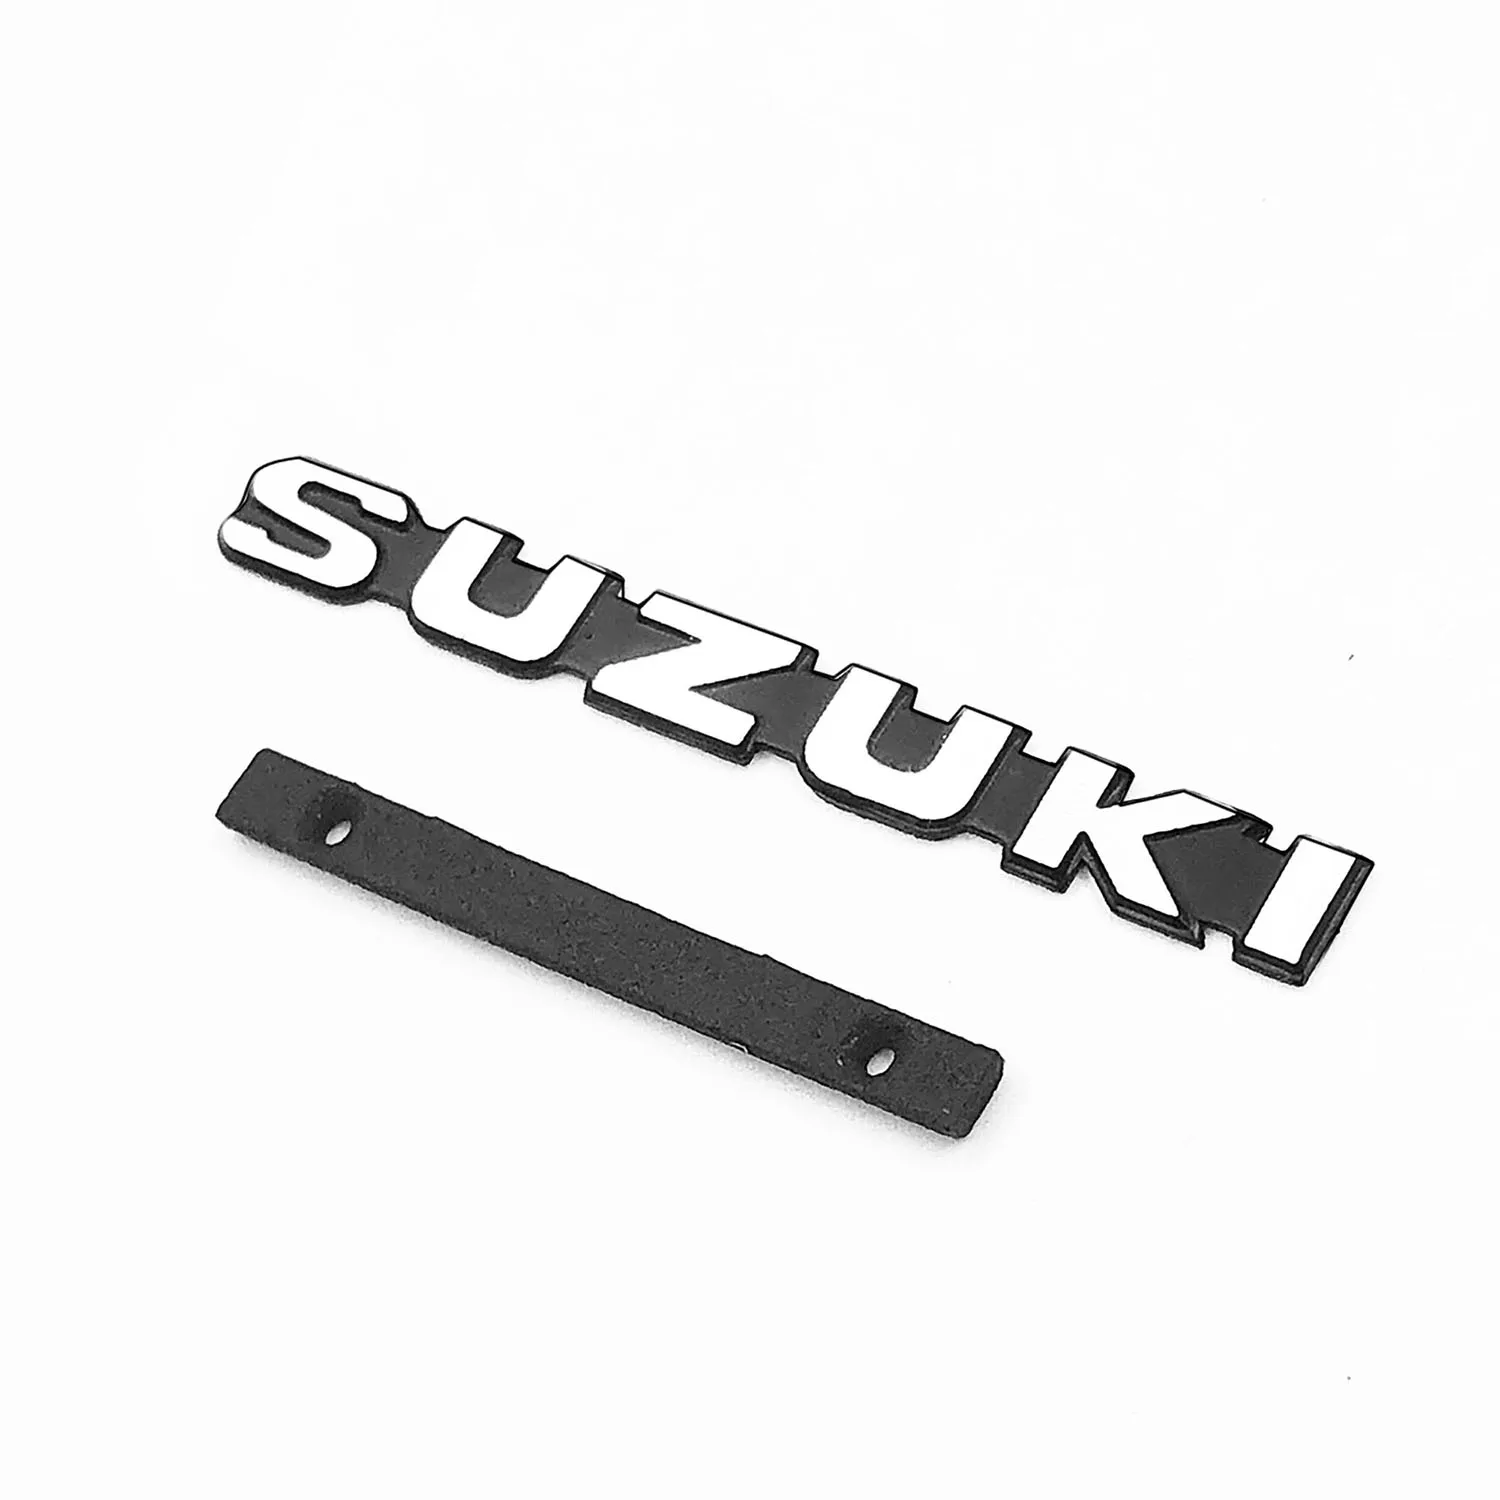 

CChand Front Side Metal Logo Sticker for 1/6 RC Capo Jimny Sixer1 Rock RC Crawler Car Off-Road Vehicles Model Toy TH20834